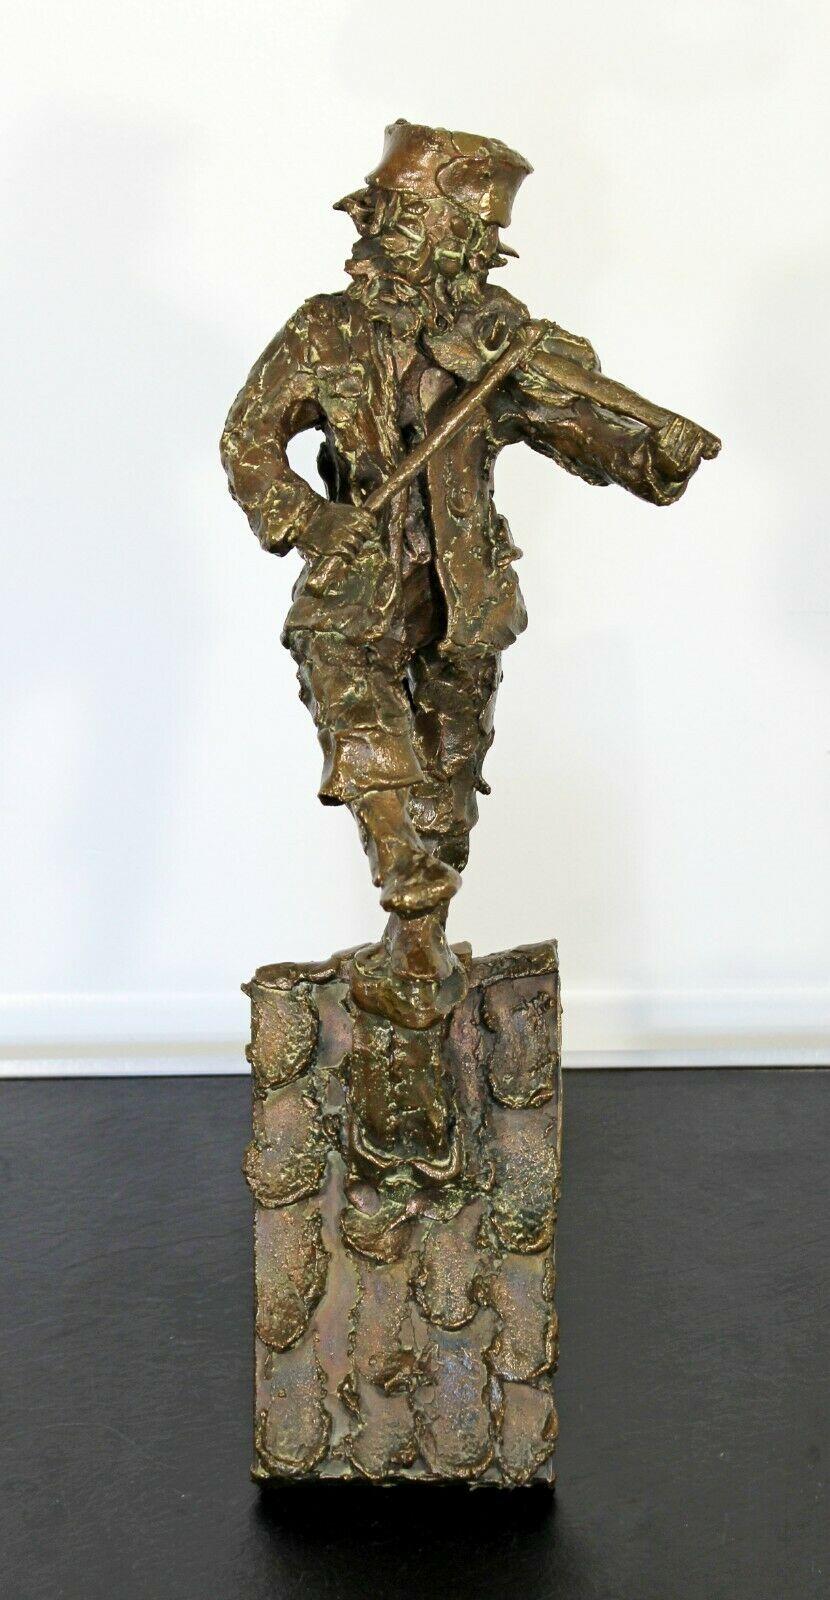 For your consideration is a fantastic, heavy bronze table sculpture, depicting a fiddler on the roof, signed. In excellent condition. The dimensions are 7